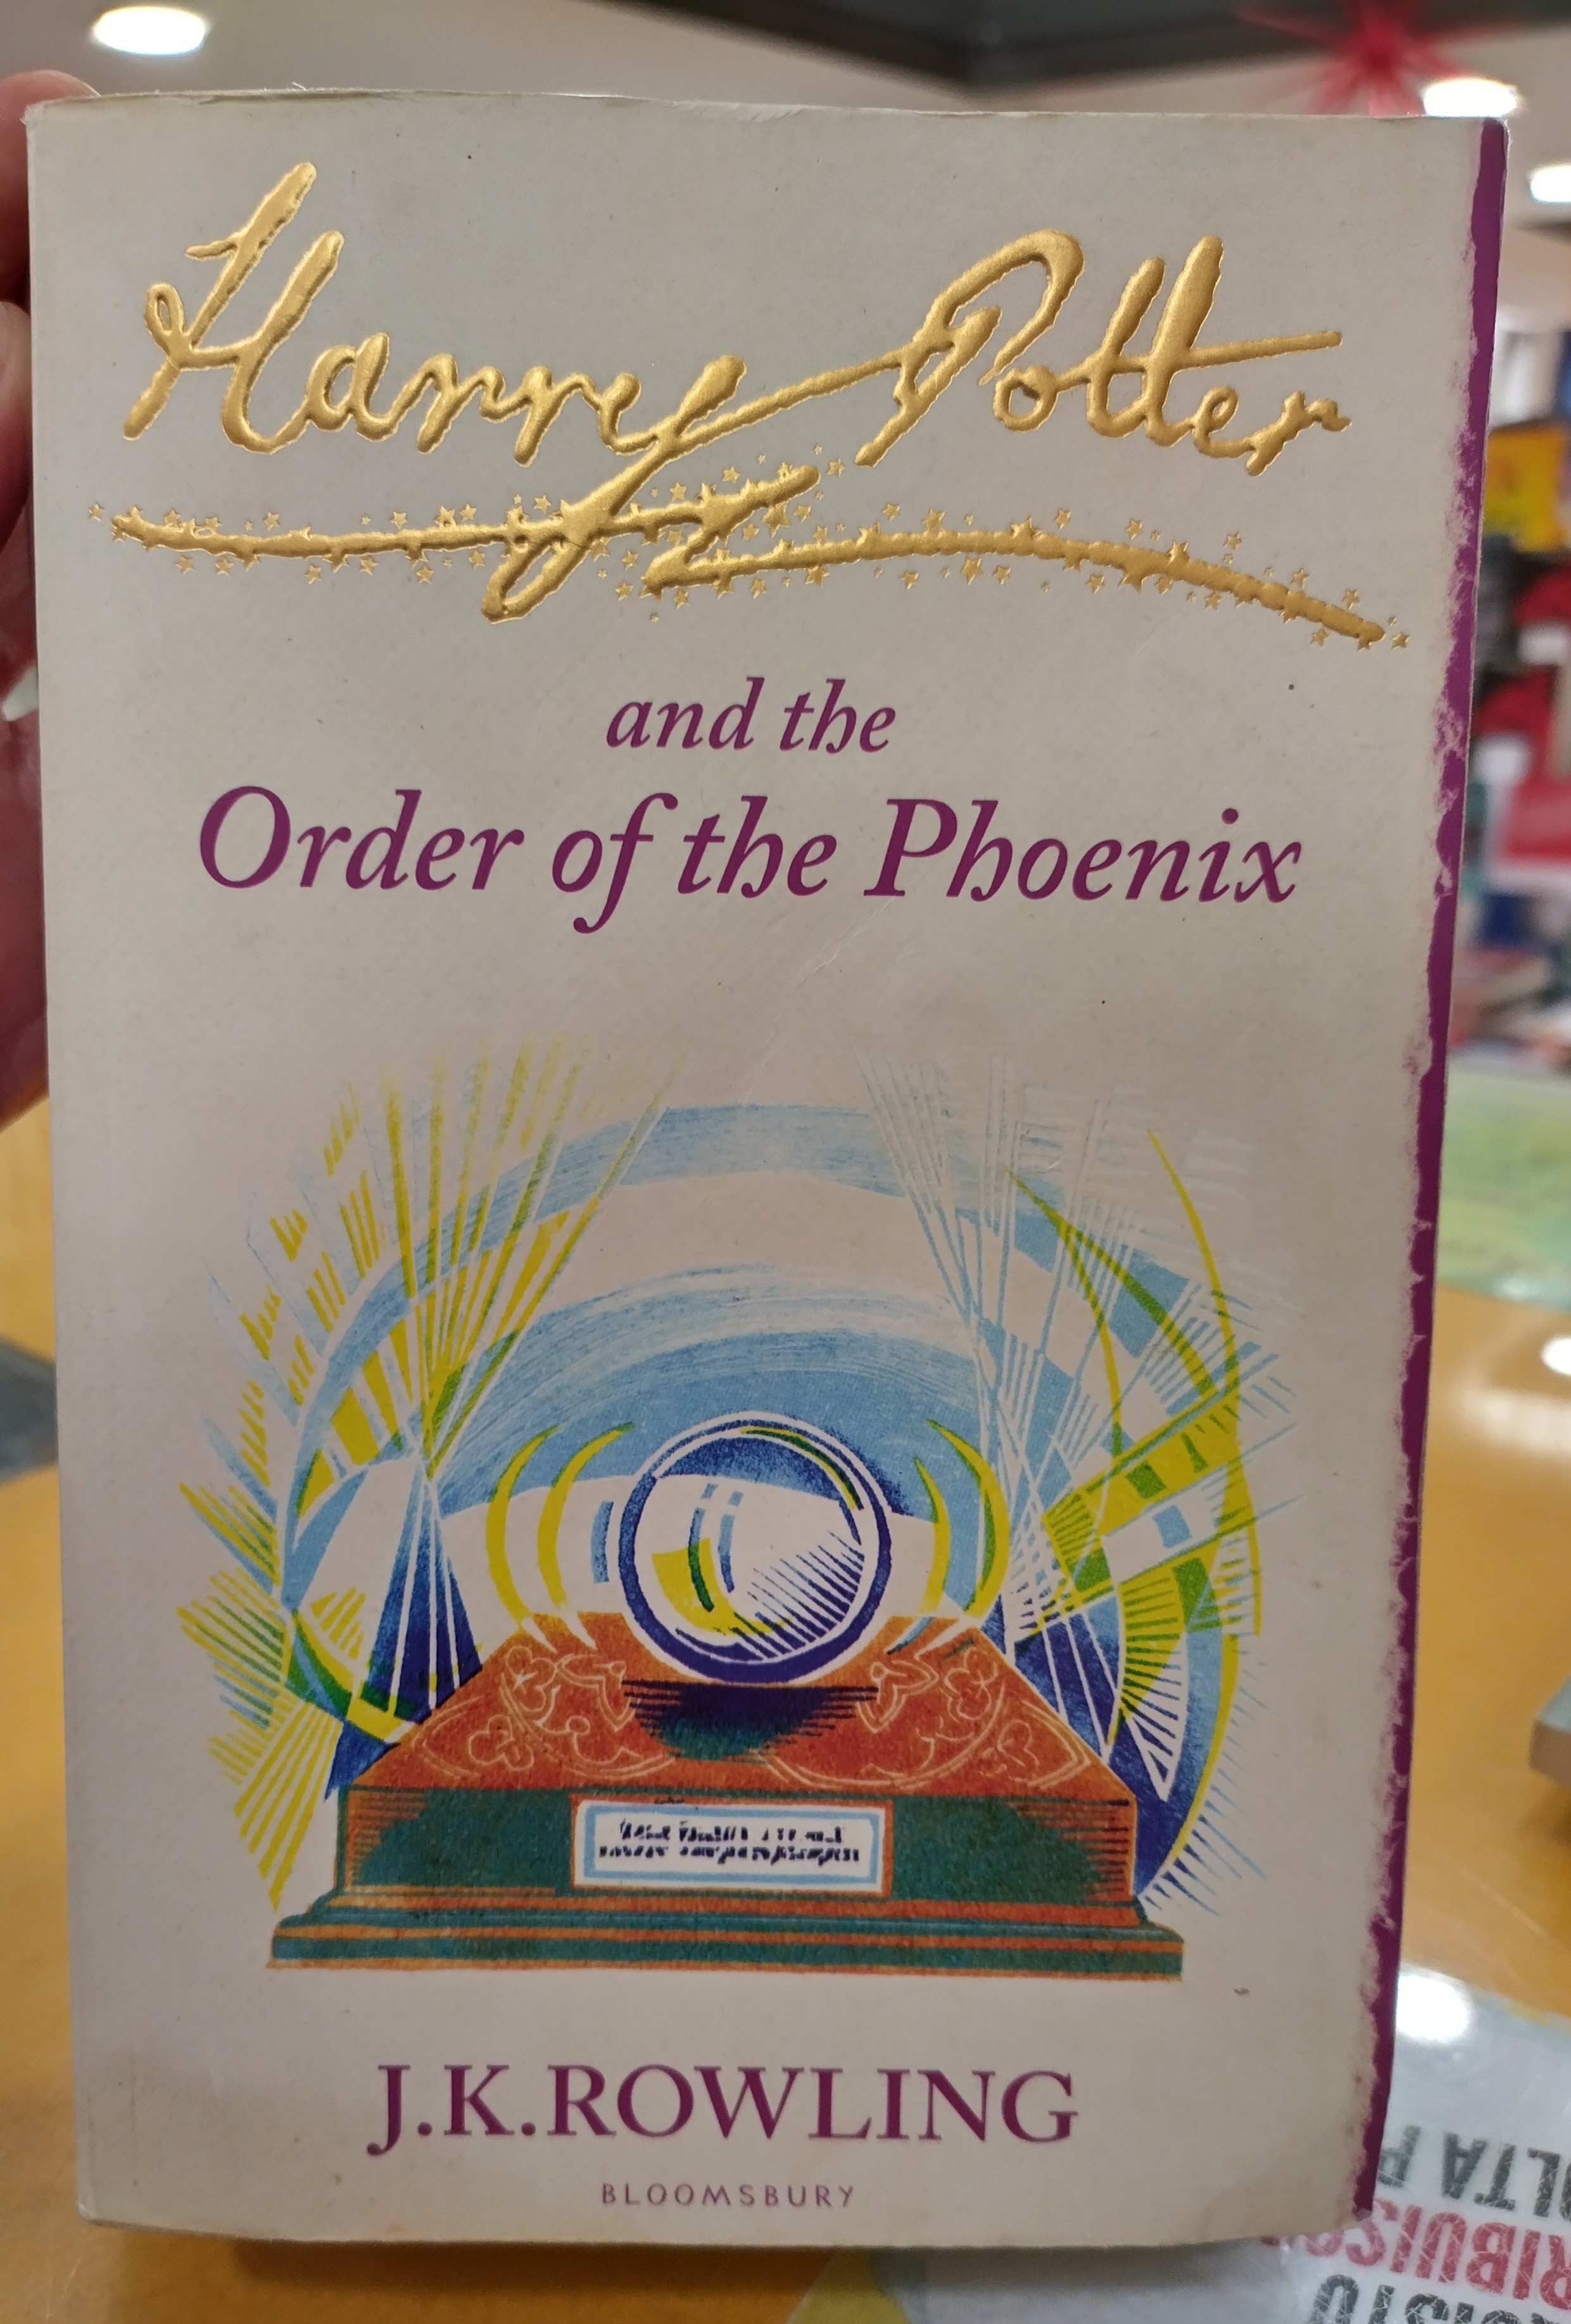 Harry potter and the order of the phoenix book 5 …